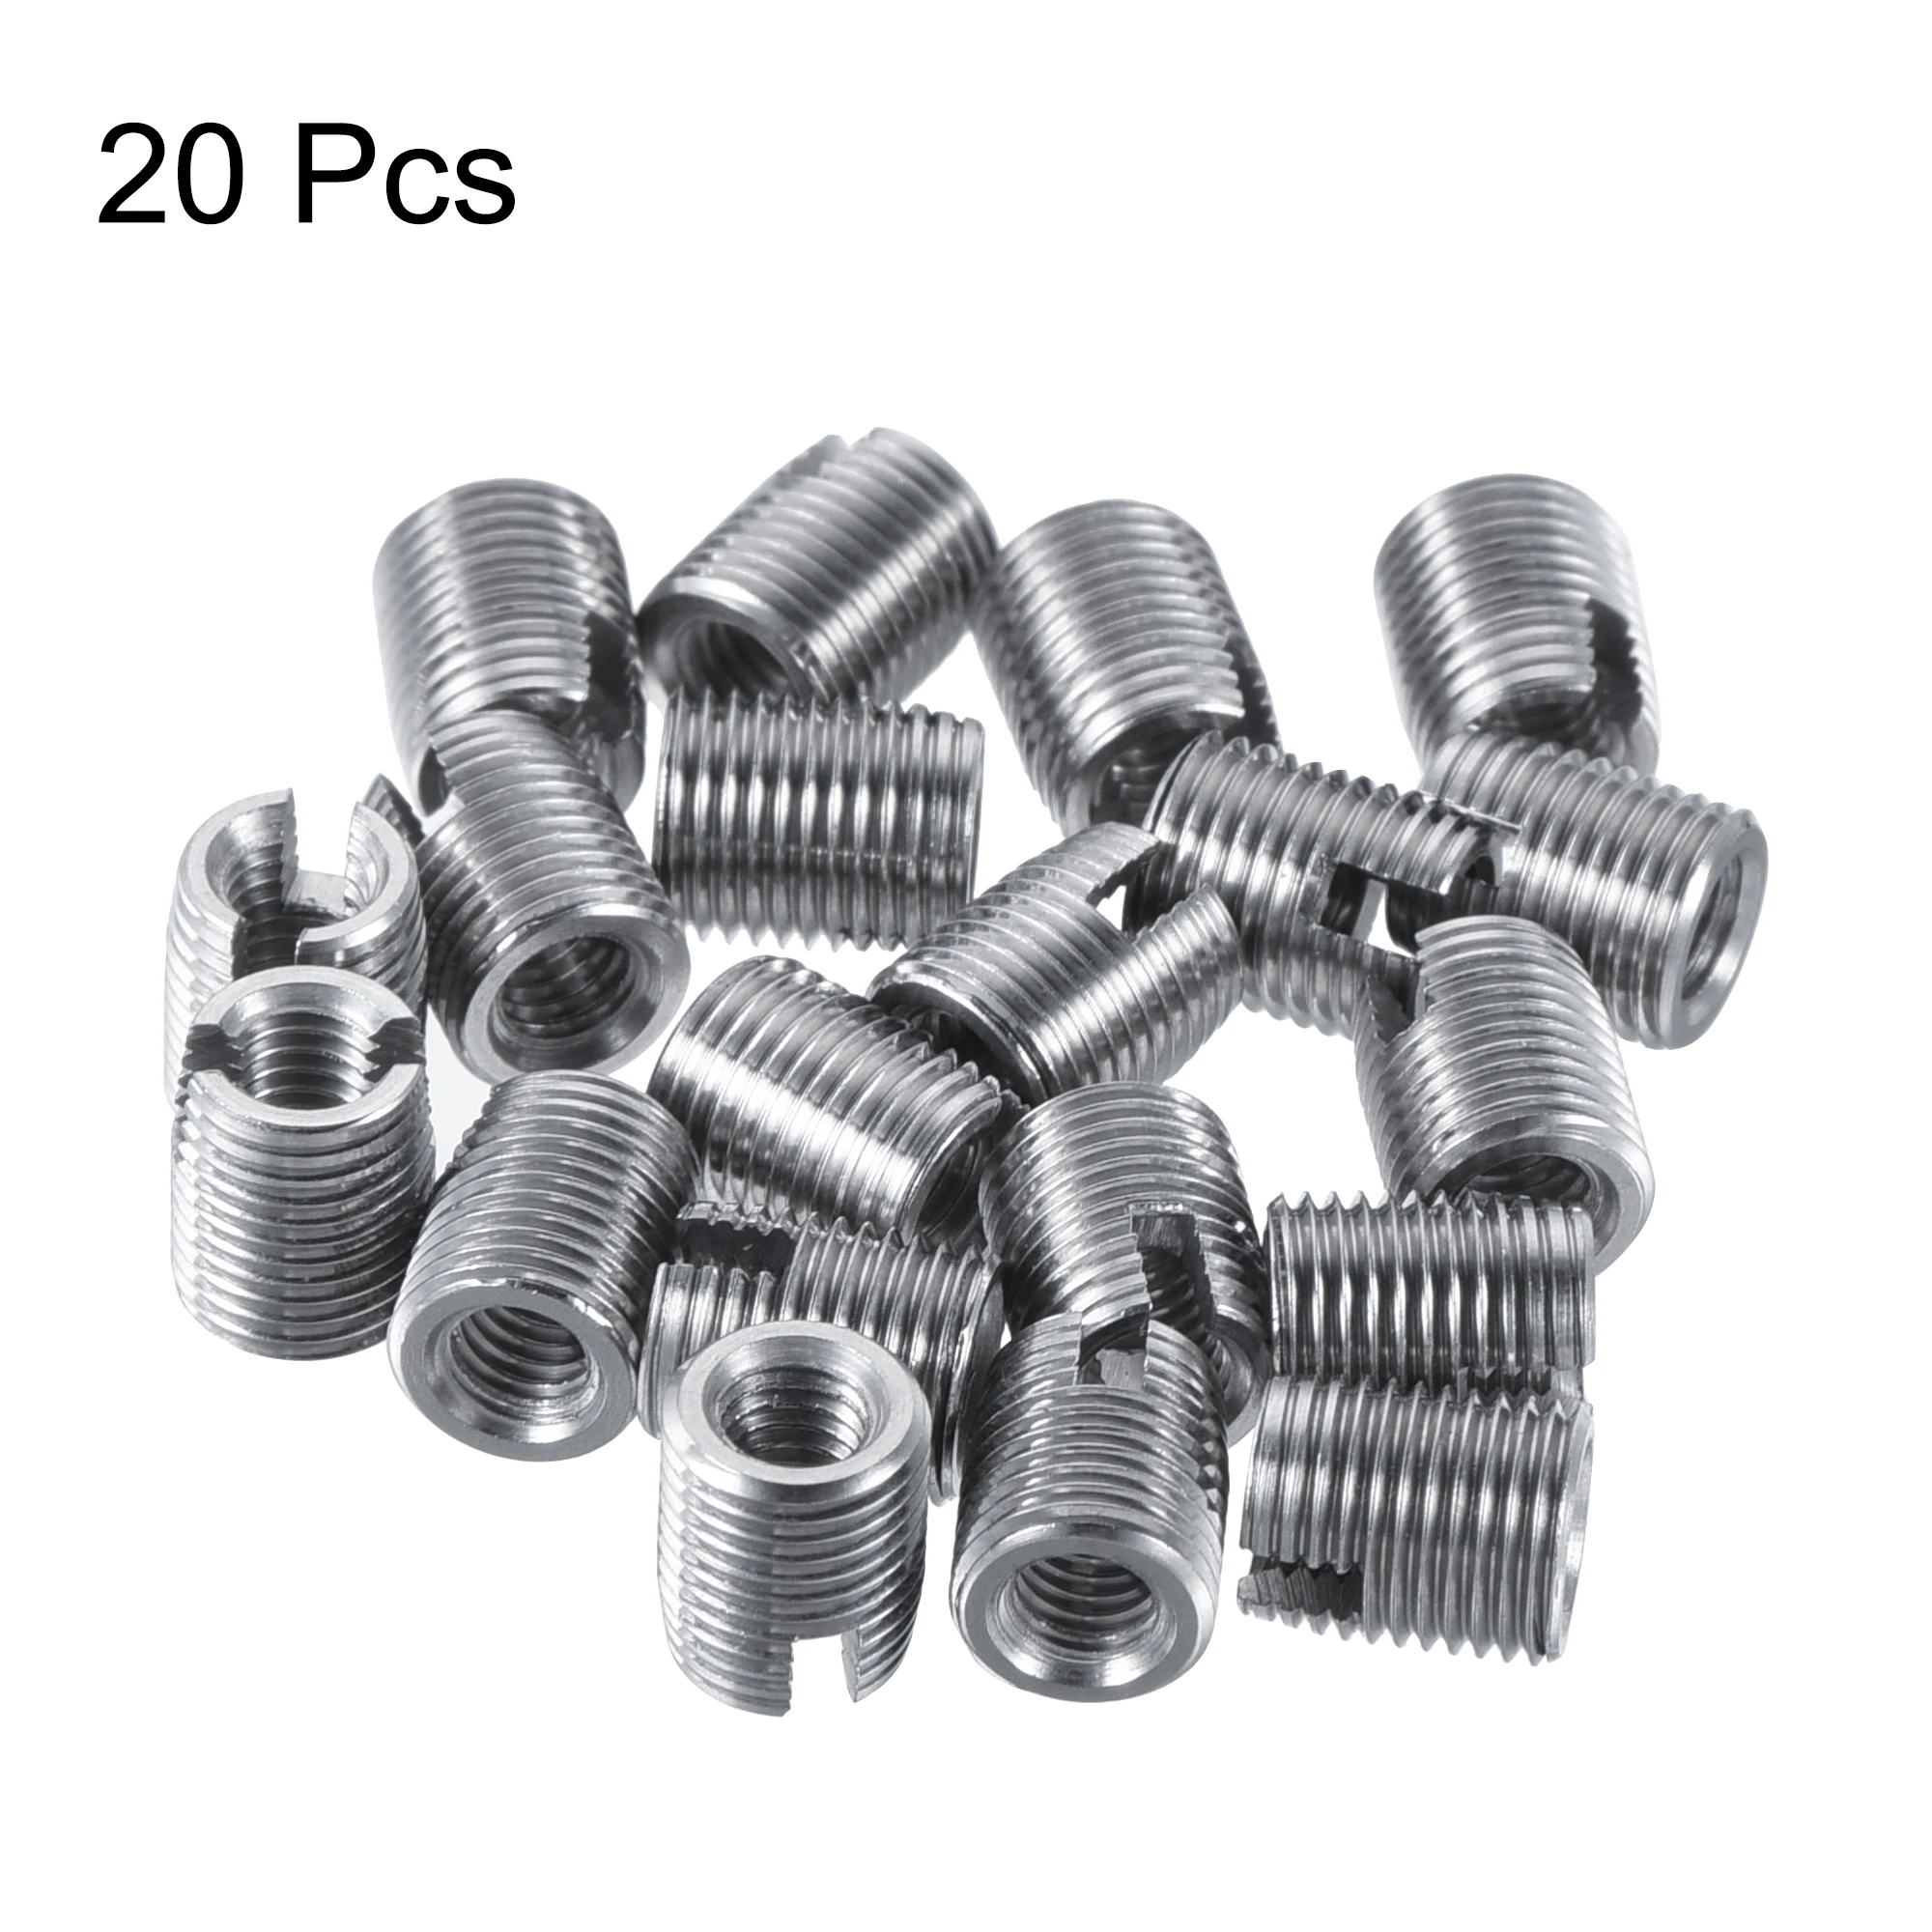 uxcell 8Pcs M3 Inner Thread 6mm Length Stainless Steel Self Tapping Thread Insert 